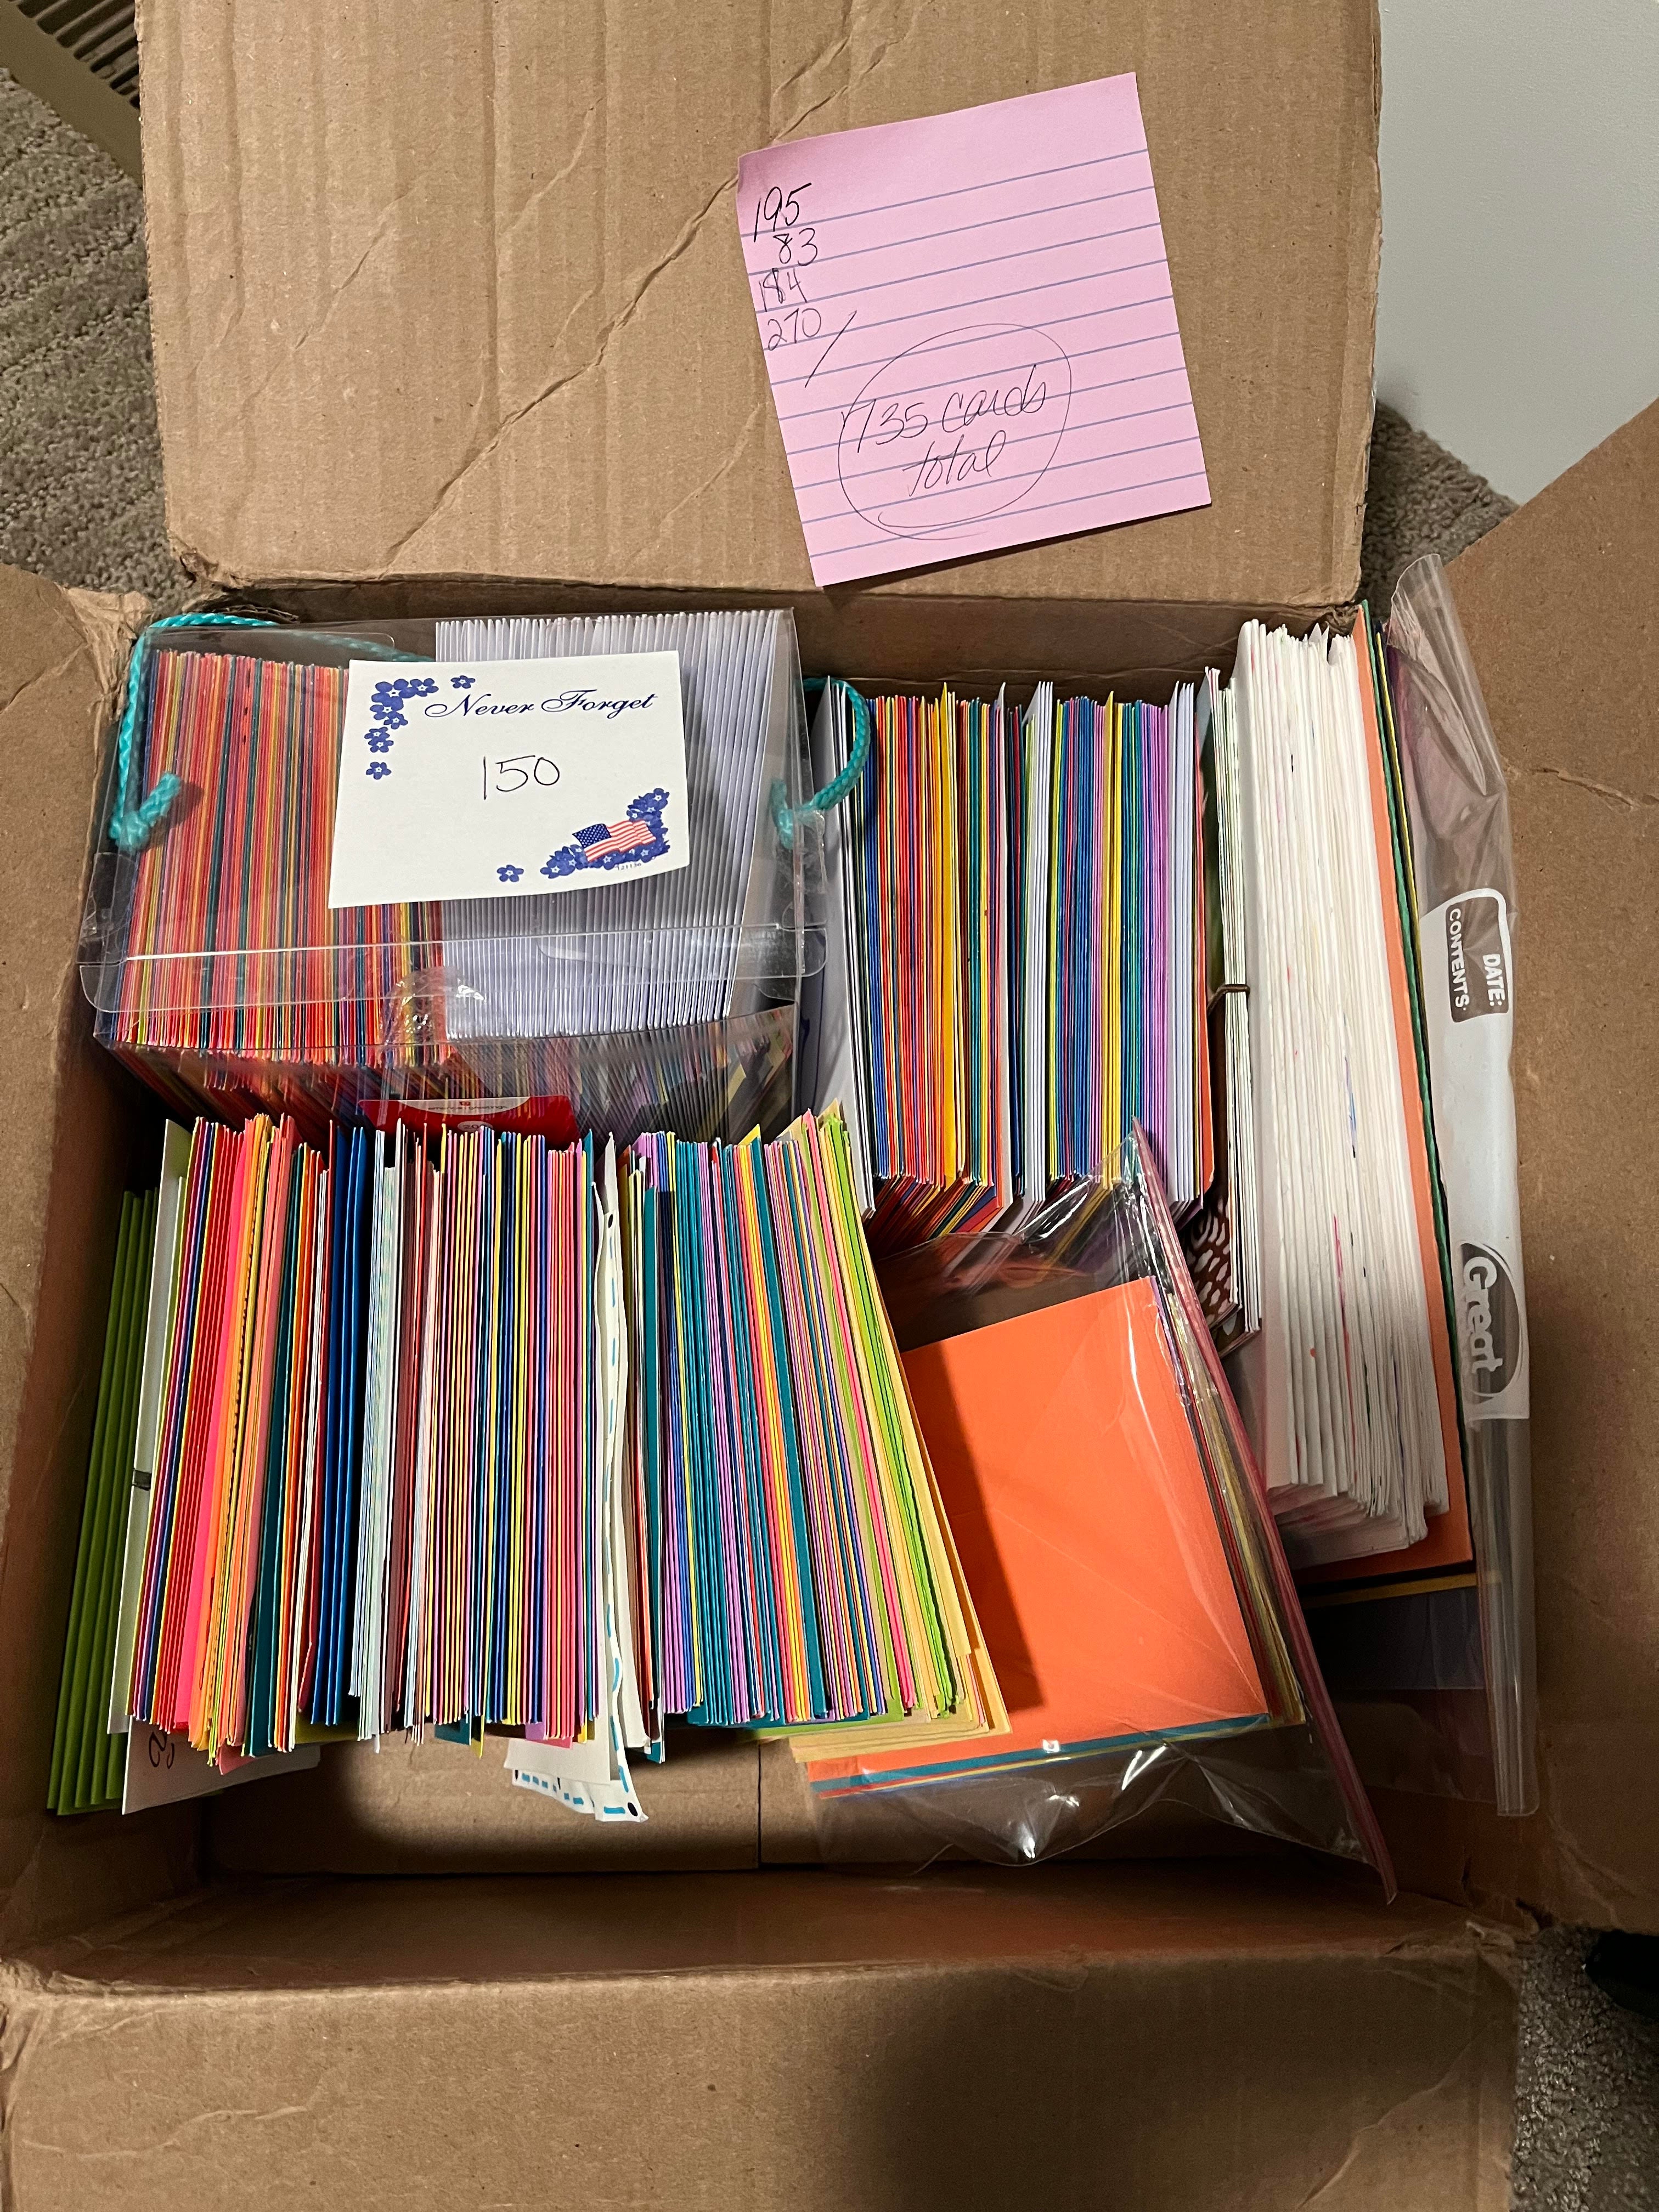 A photo of a cardboard box filled with 735 hand-drawn thank you cards in various colors and sizes.